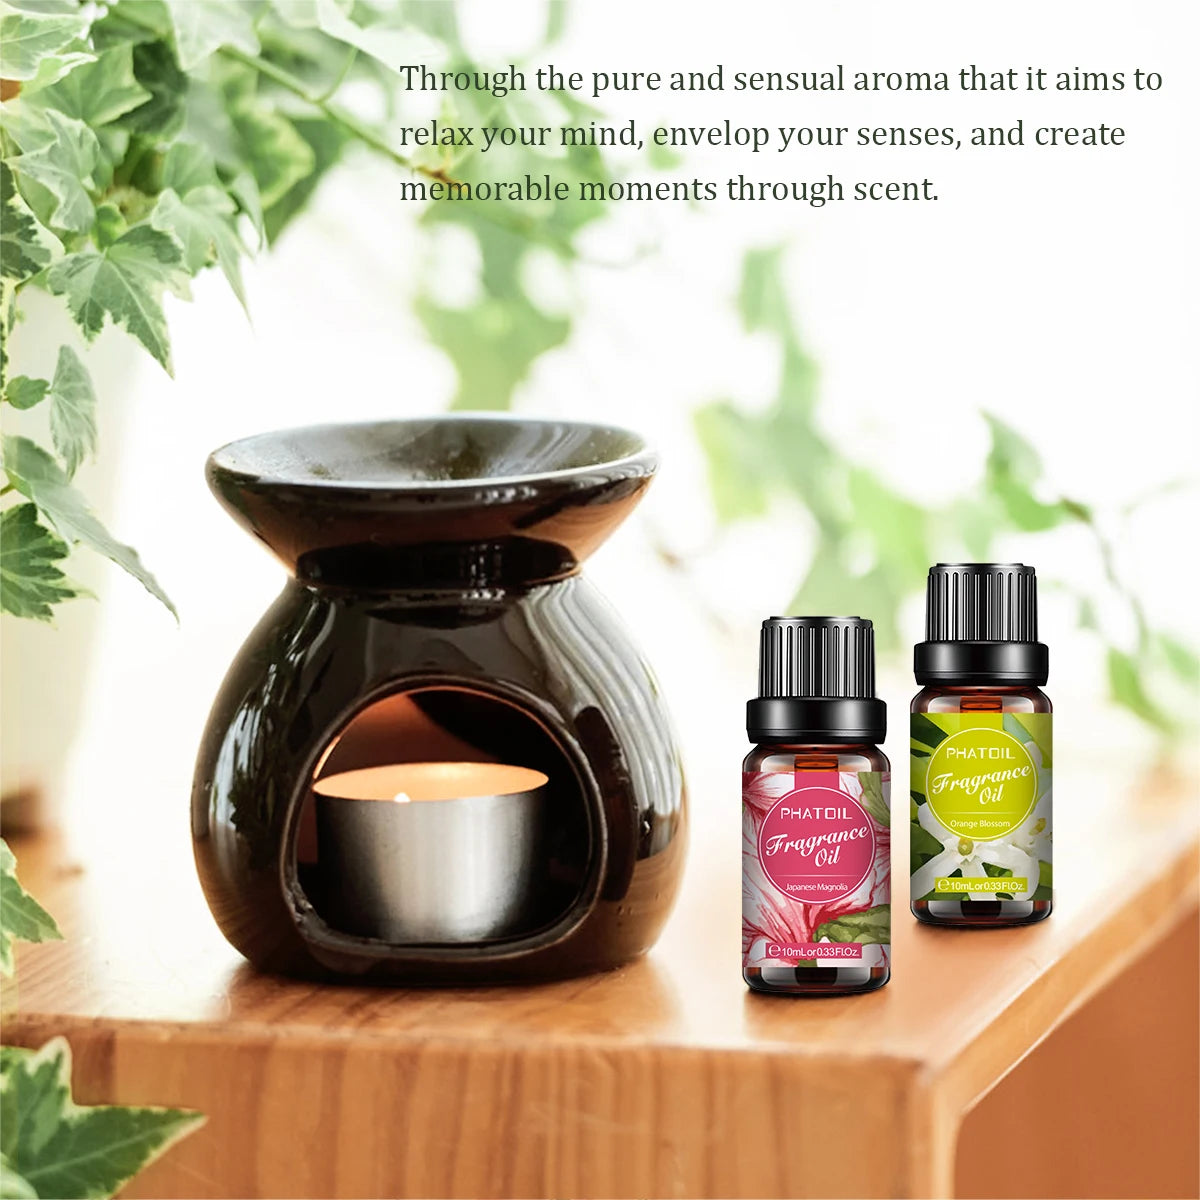 Floral scented essential oils, essential oils for humidifiers Aromatherapy essential oil diffusers